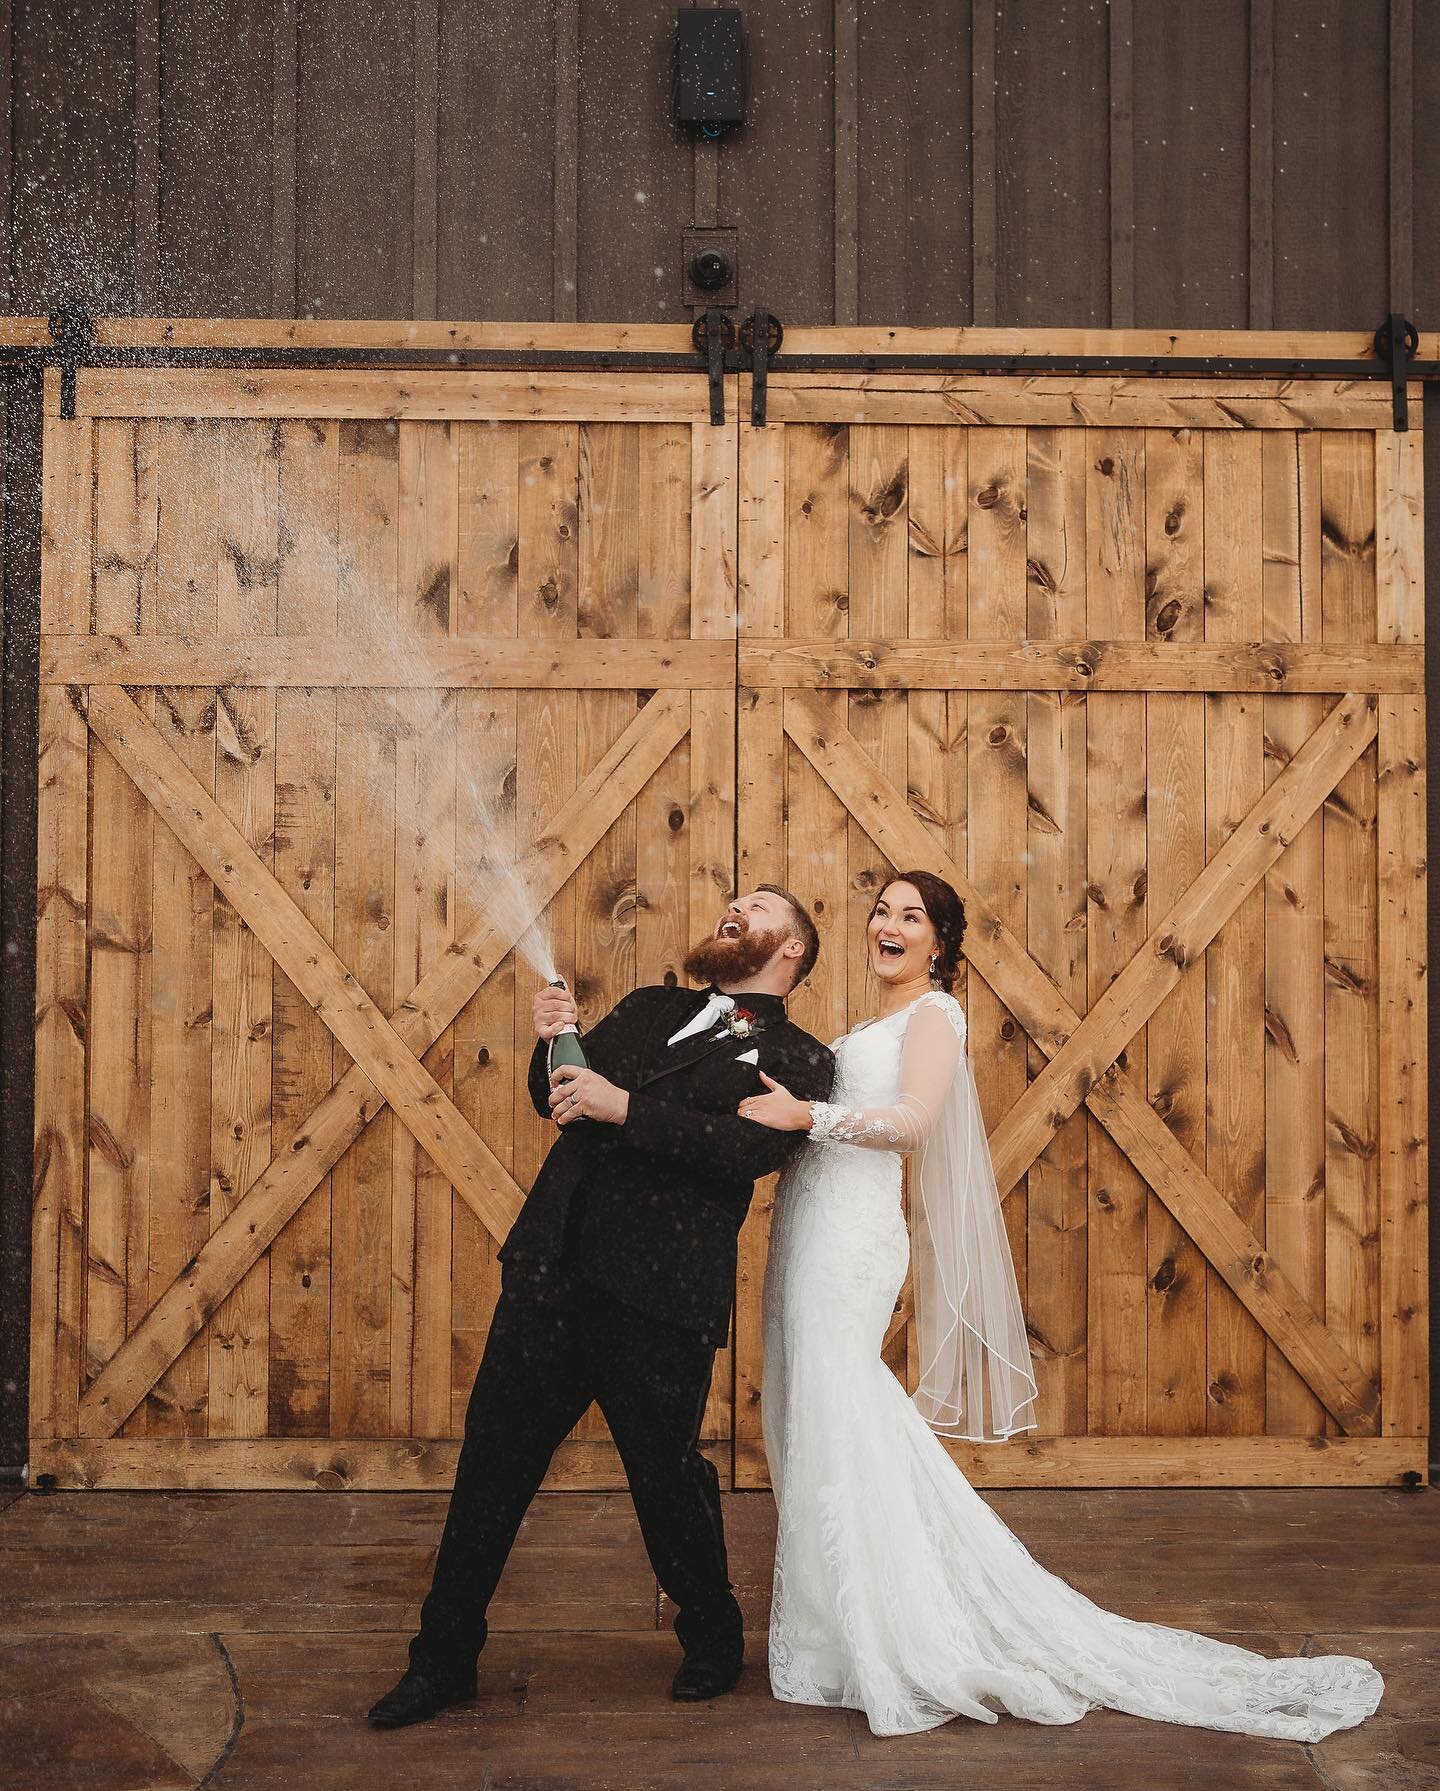 Morgan and Jake&rsquo;s winter wedding was a dream! We could not be more obsessed with this day and these photos❄️

pc: @annjames.photography